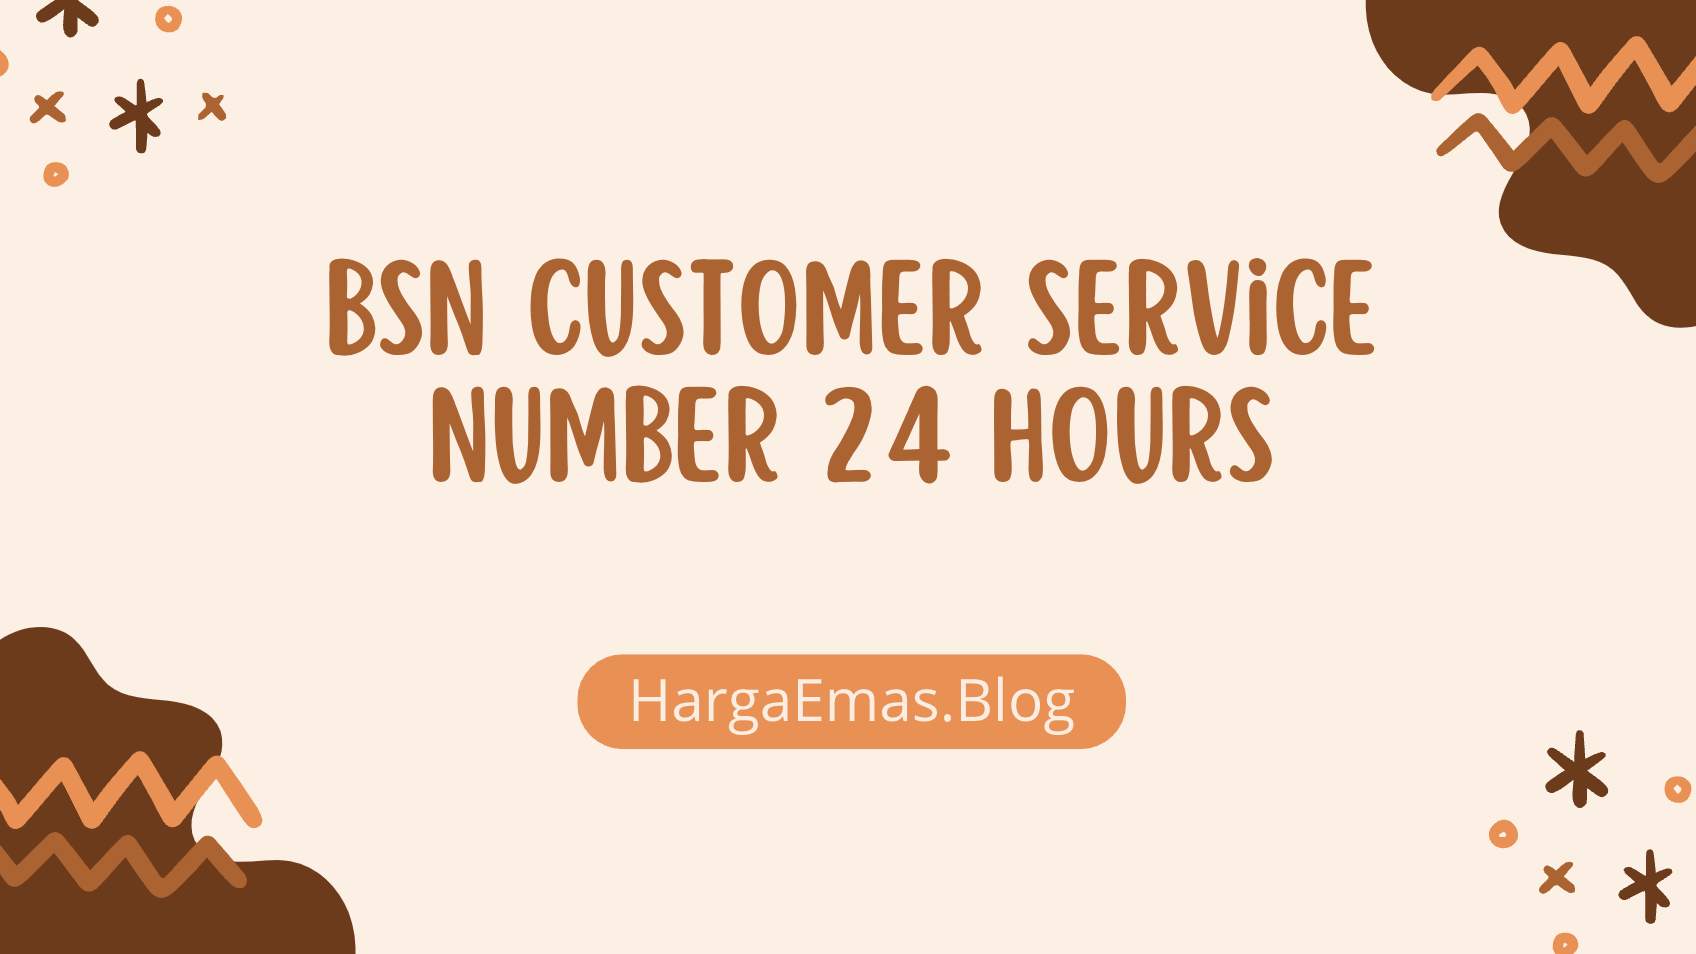 BSN Customer Service Number 24 Hours